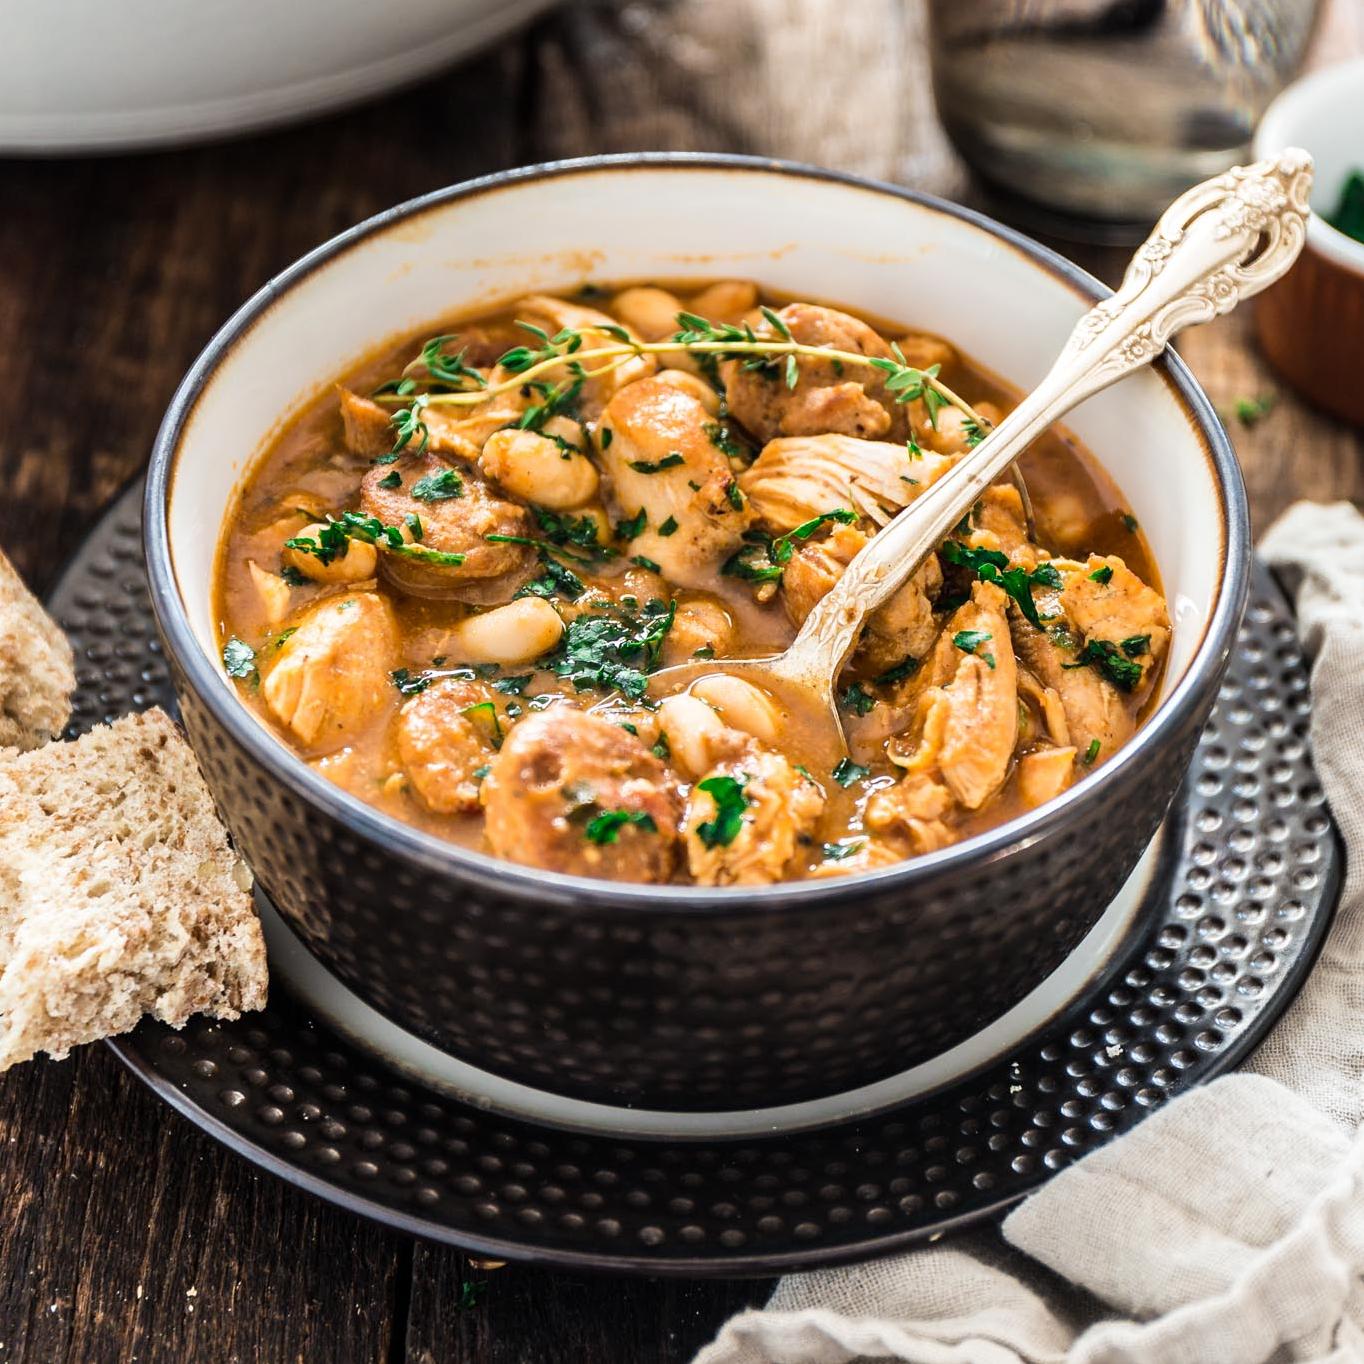  Get ready to experience the flavors of Brazil with this delicious chicken stew.